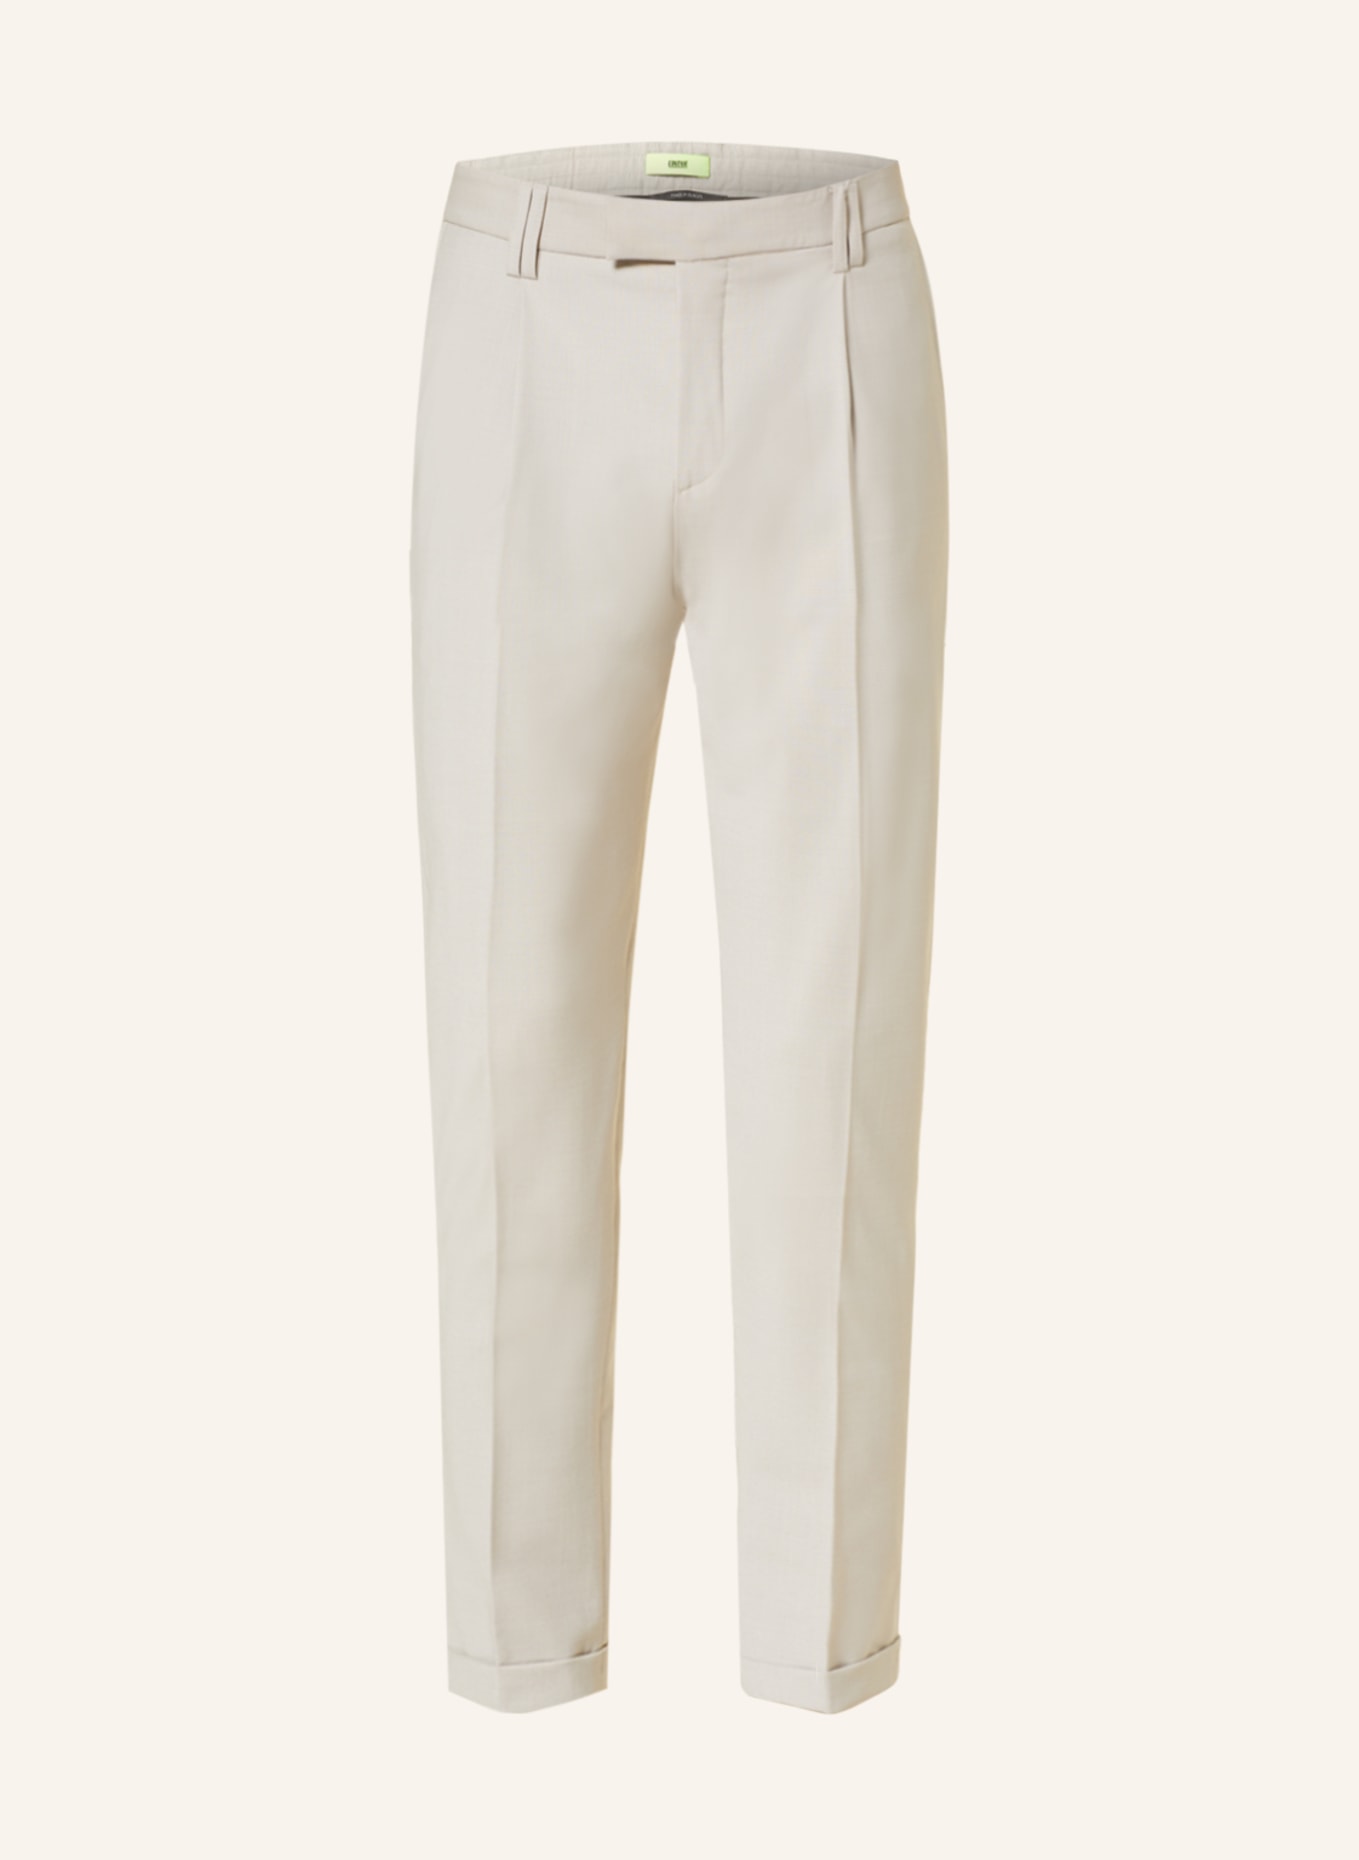 Relaxed Fit Linen suit trousers - Black - Men | H&M IN